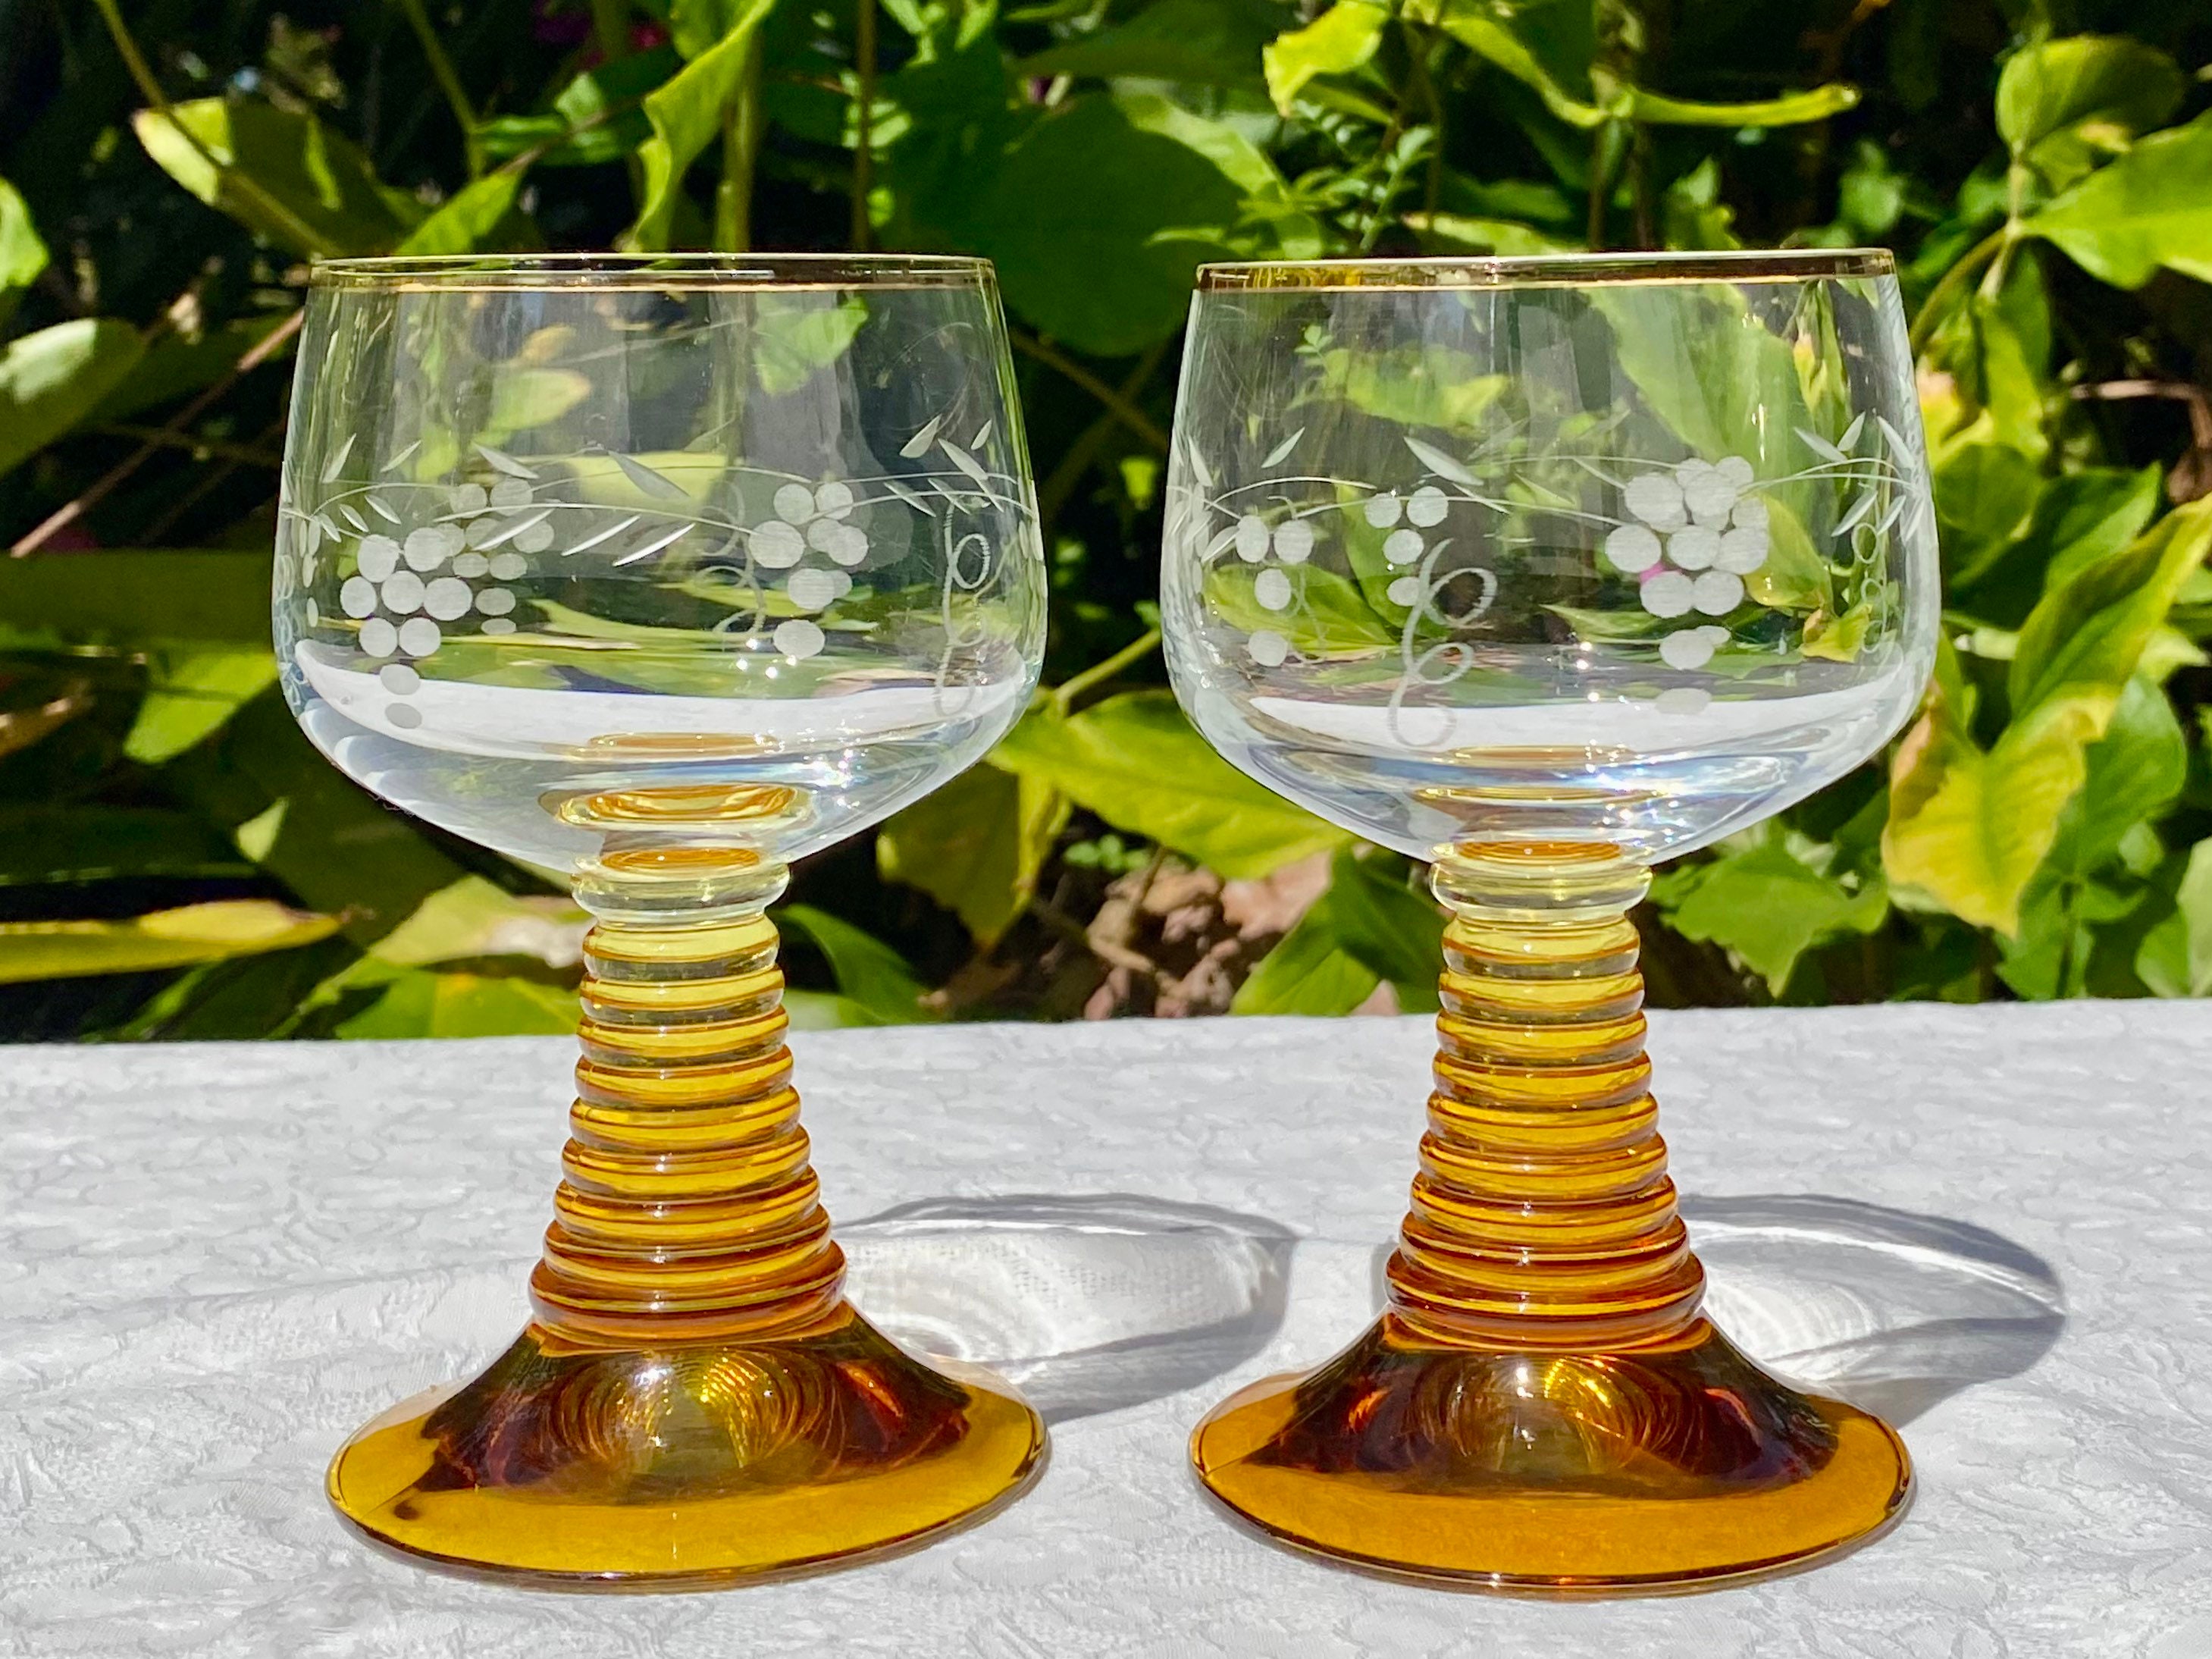 Set of 5 Antique French Bistro Wine Glasses. Cut Glass. Aperitif Glass.  Sherry Glass. Port Wine. Mouth Blown Antique Bistro Glasses. 